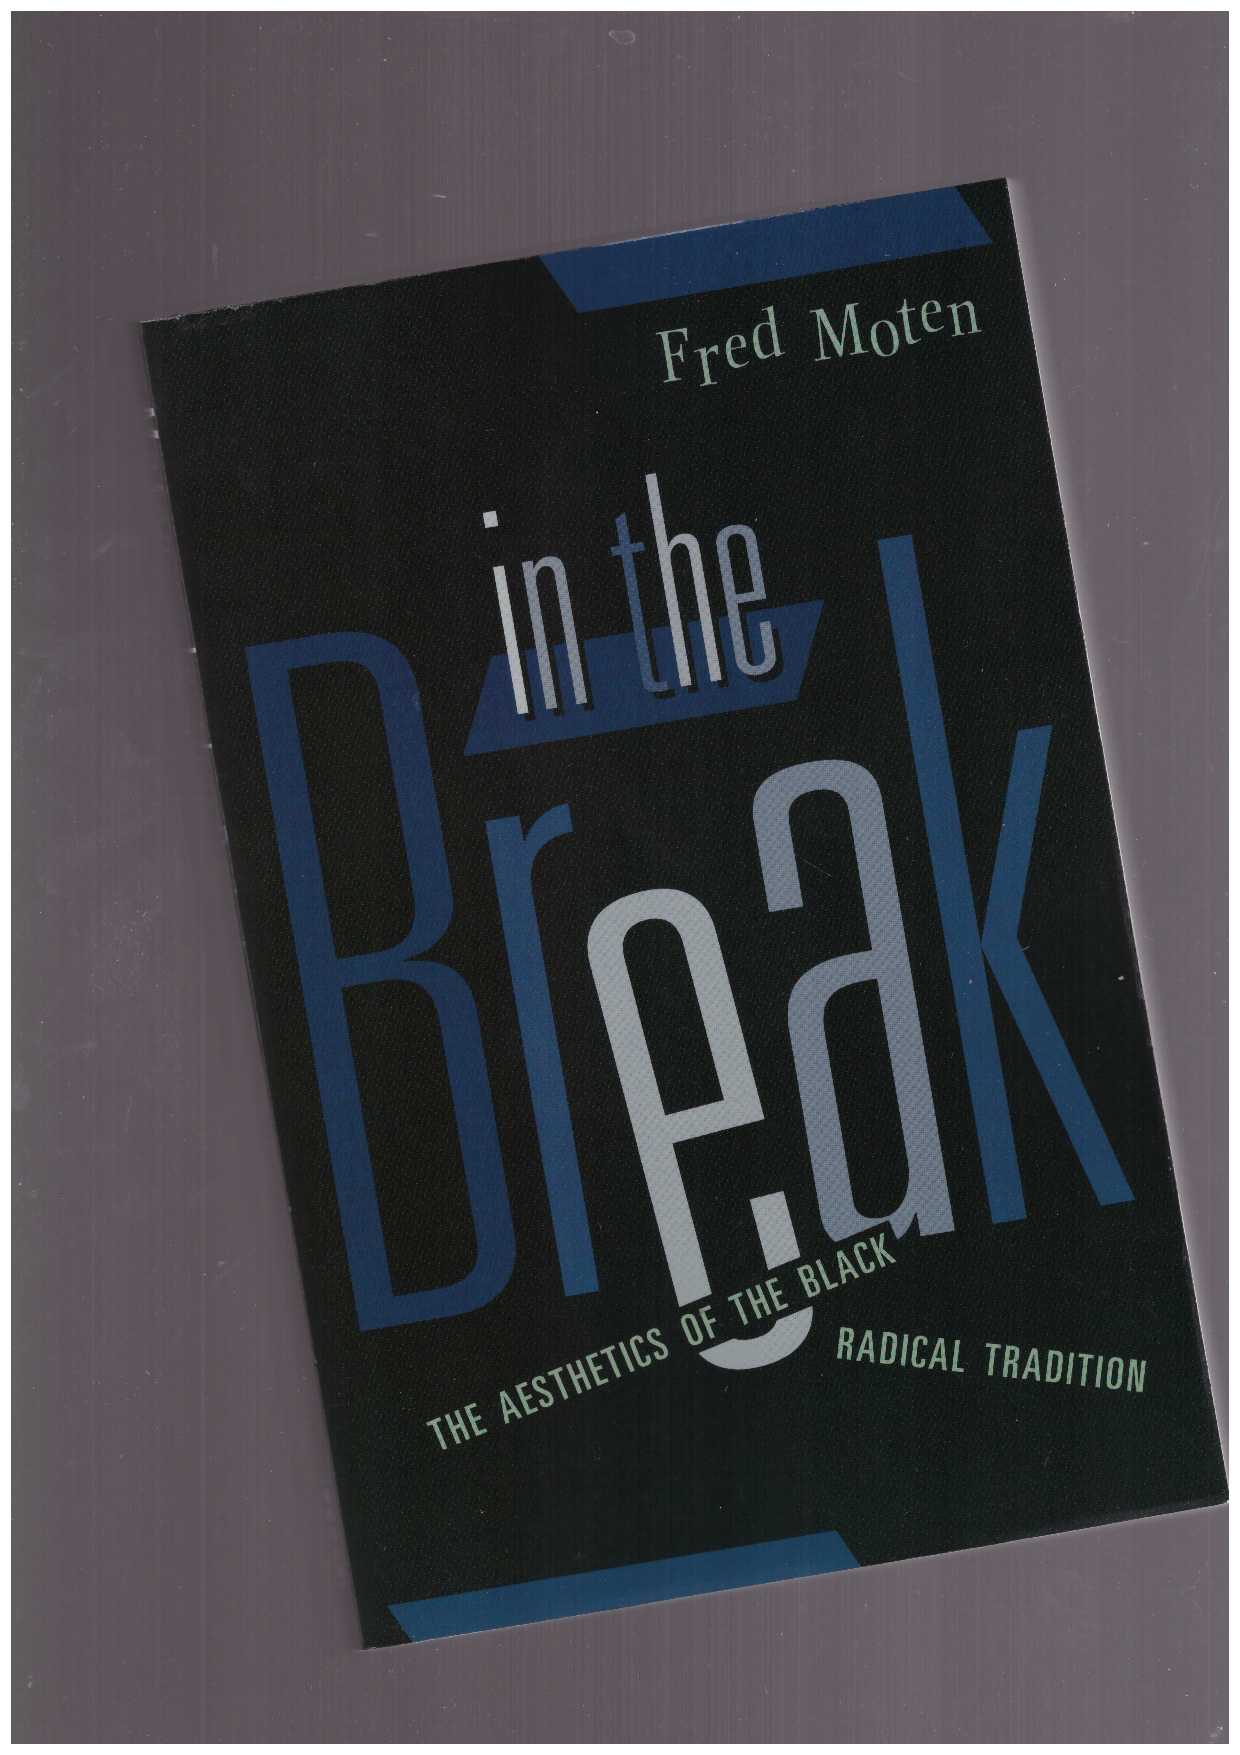 MOTEN, Fred - In the Break.The Aesthetics of the Black Radical Tradition